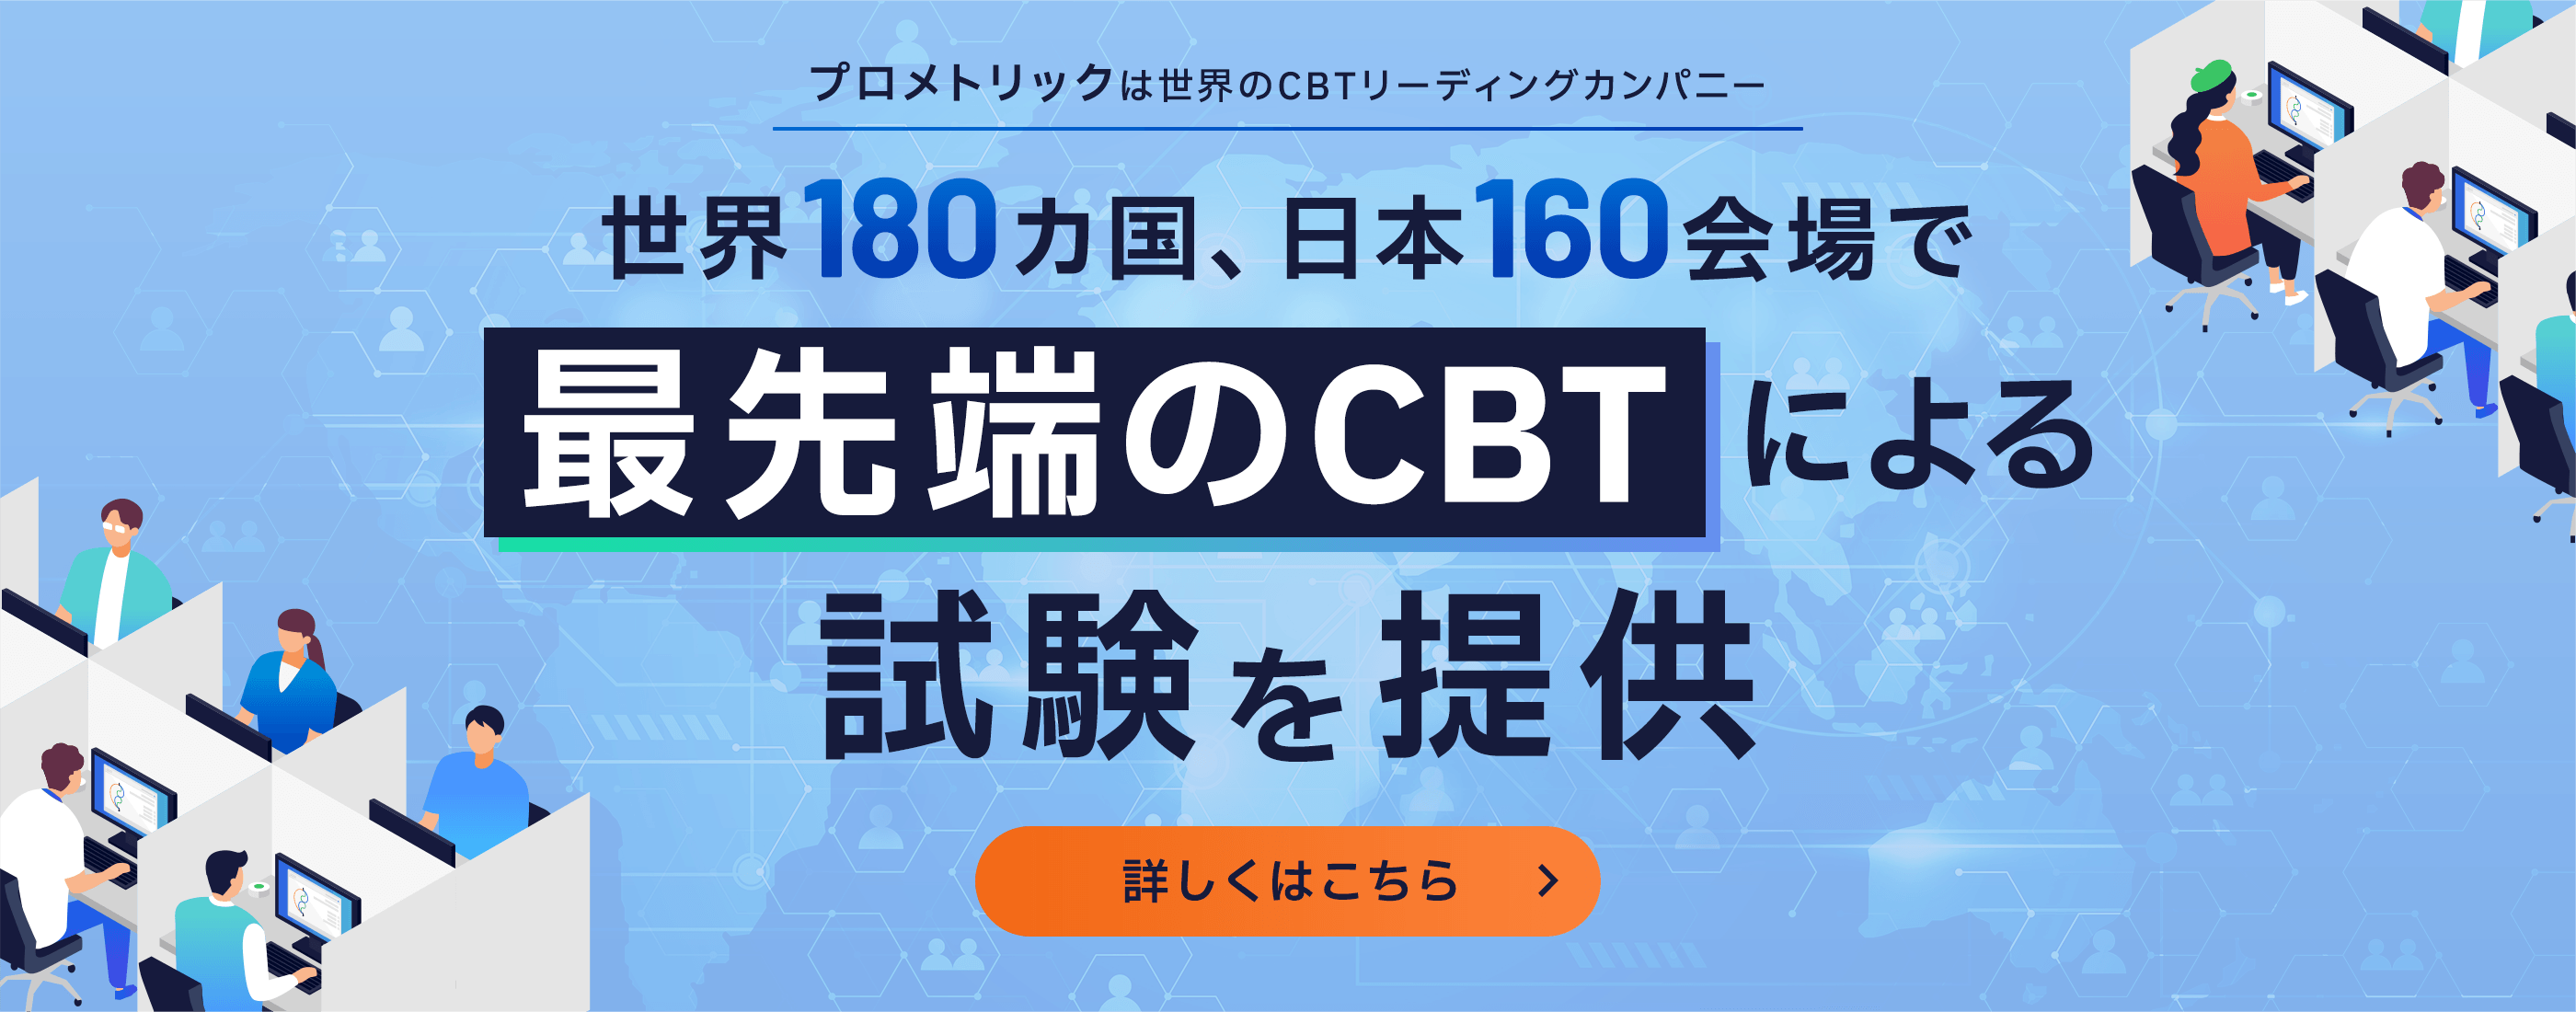 [Prometric is the world's leading CBT company] Provides cutting-edge CBT testing in 180 countries around the world and 160 Test Center in Japan